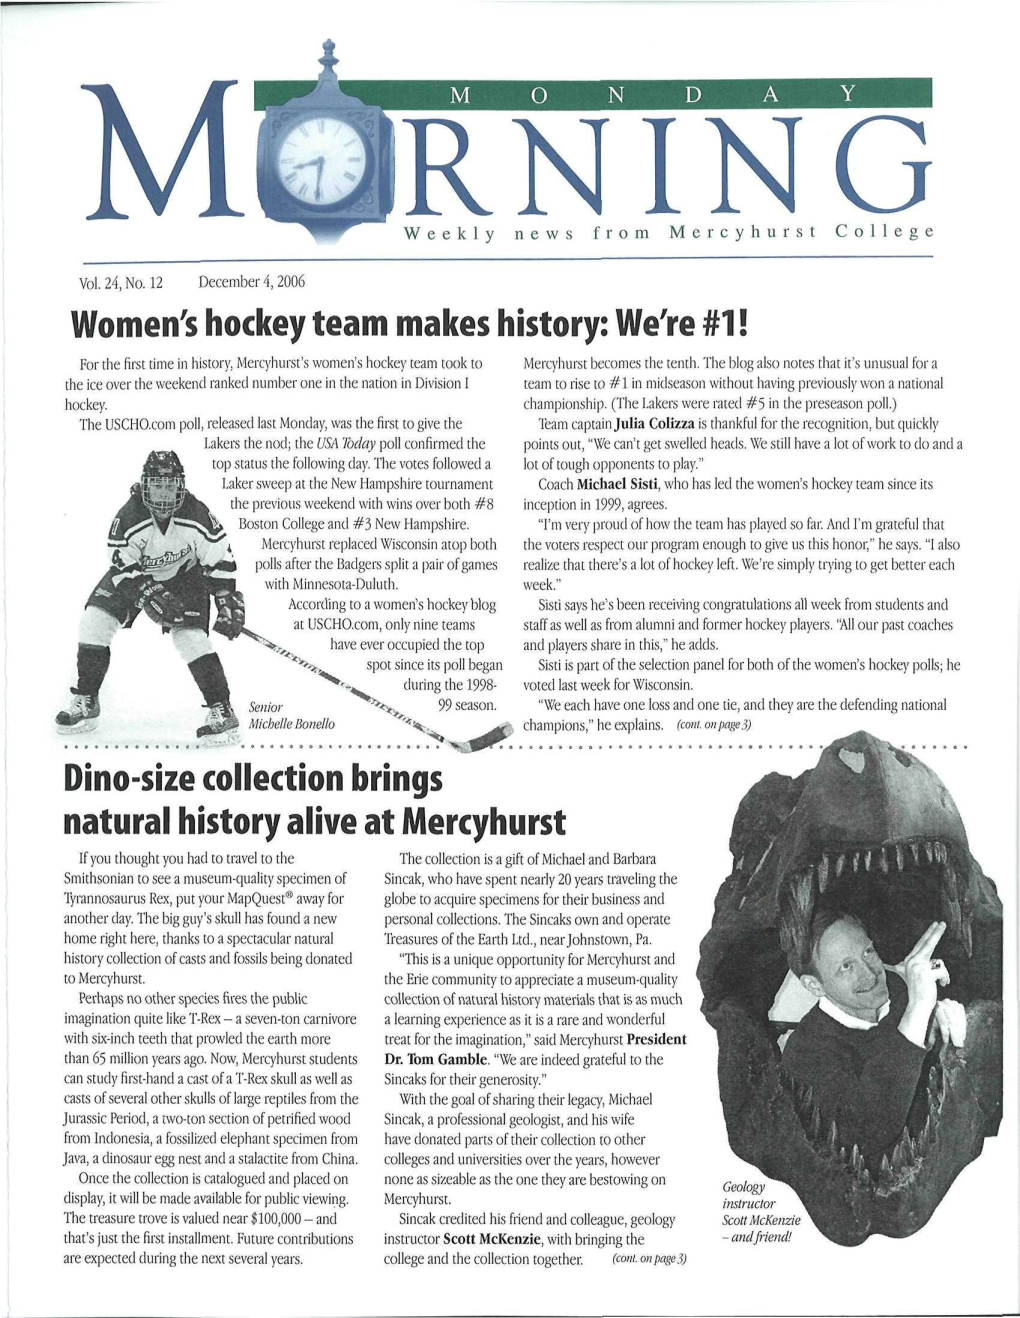 Women's Hockey Team Makes History: We're #1! Dino-Size Collection